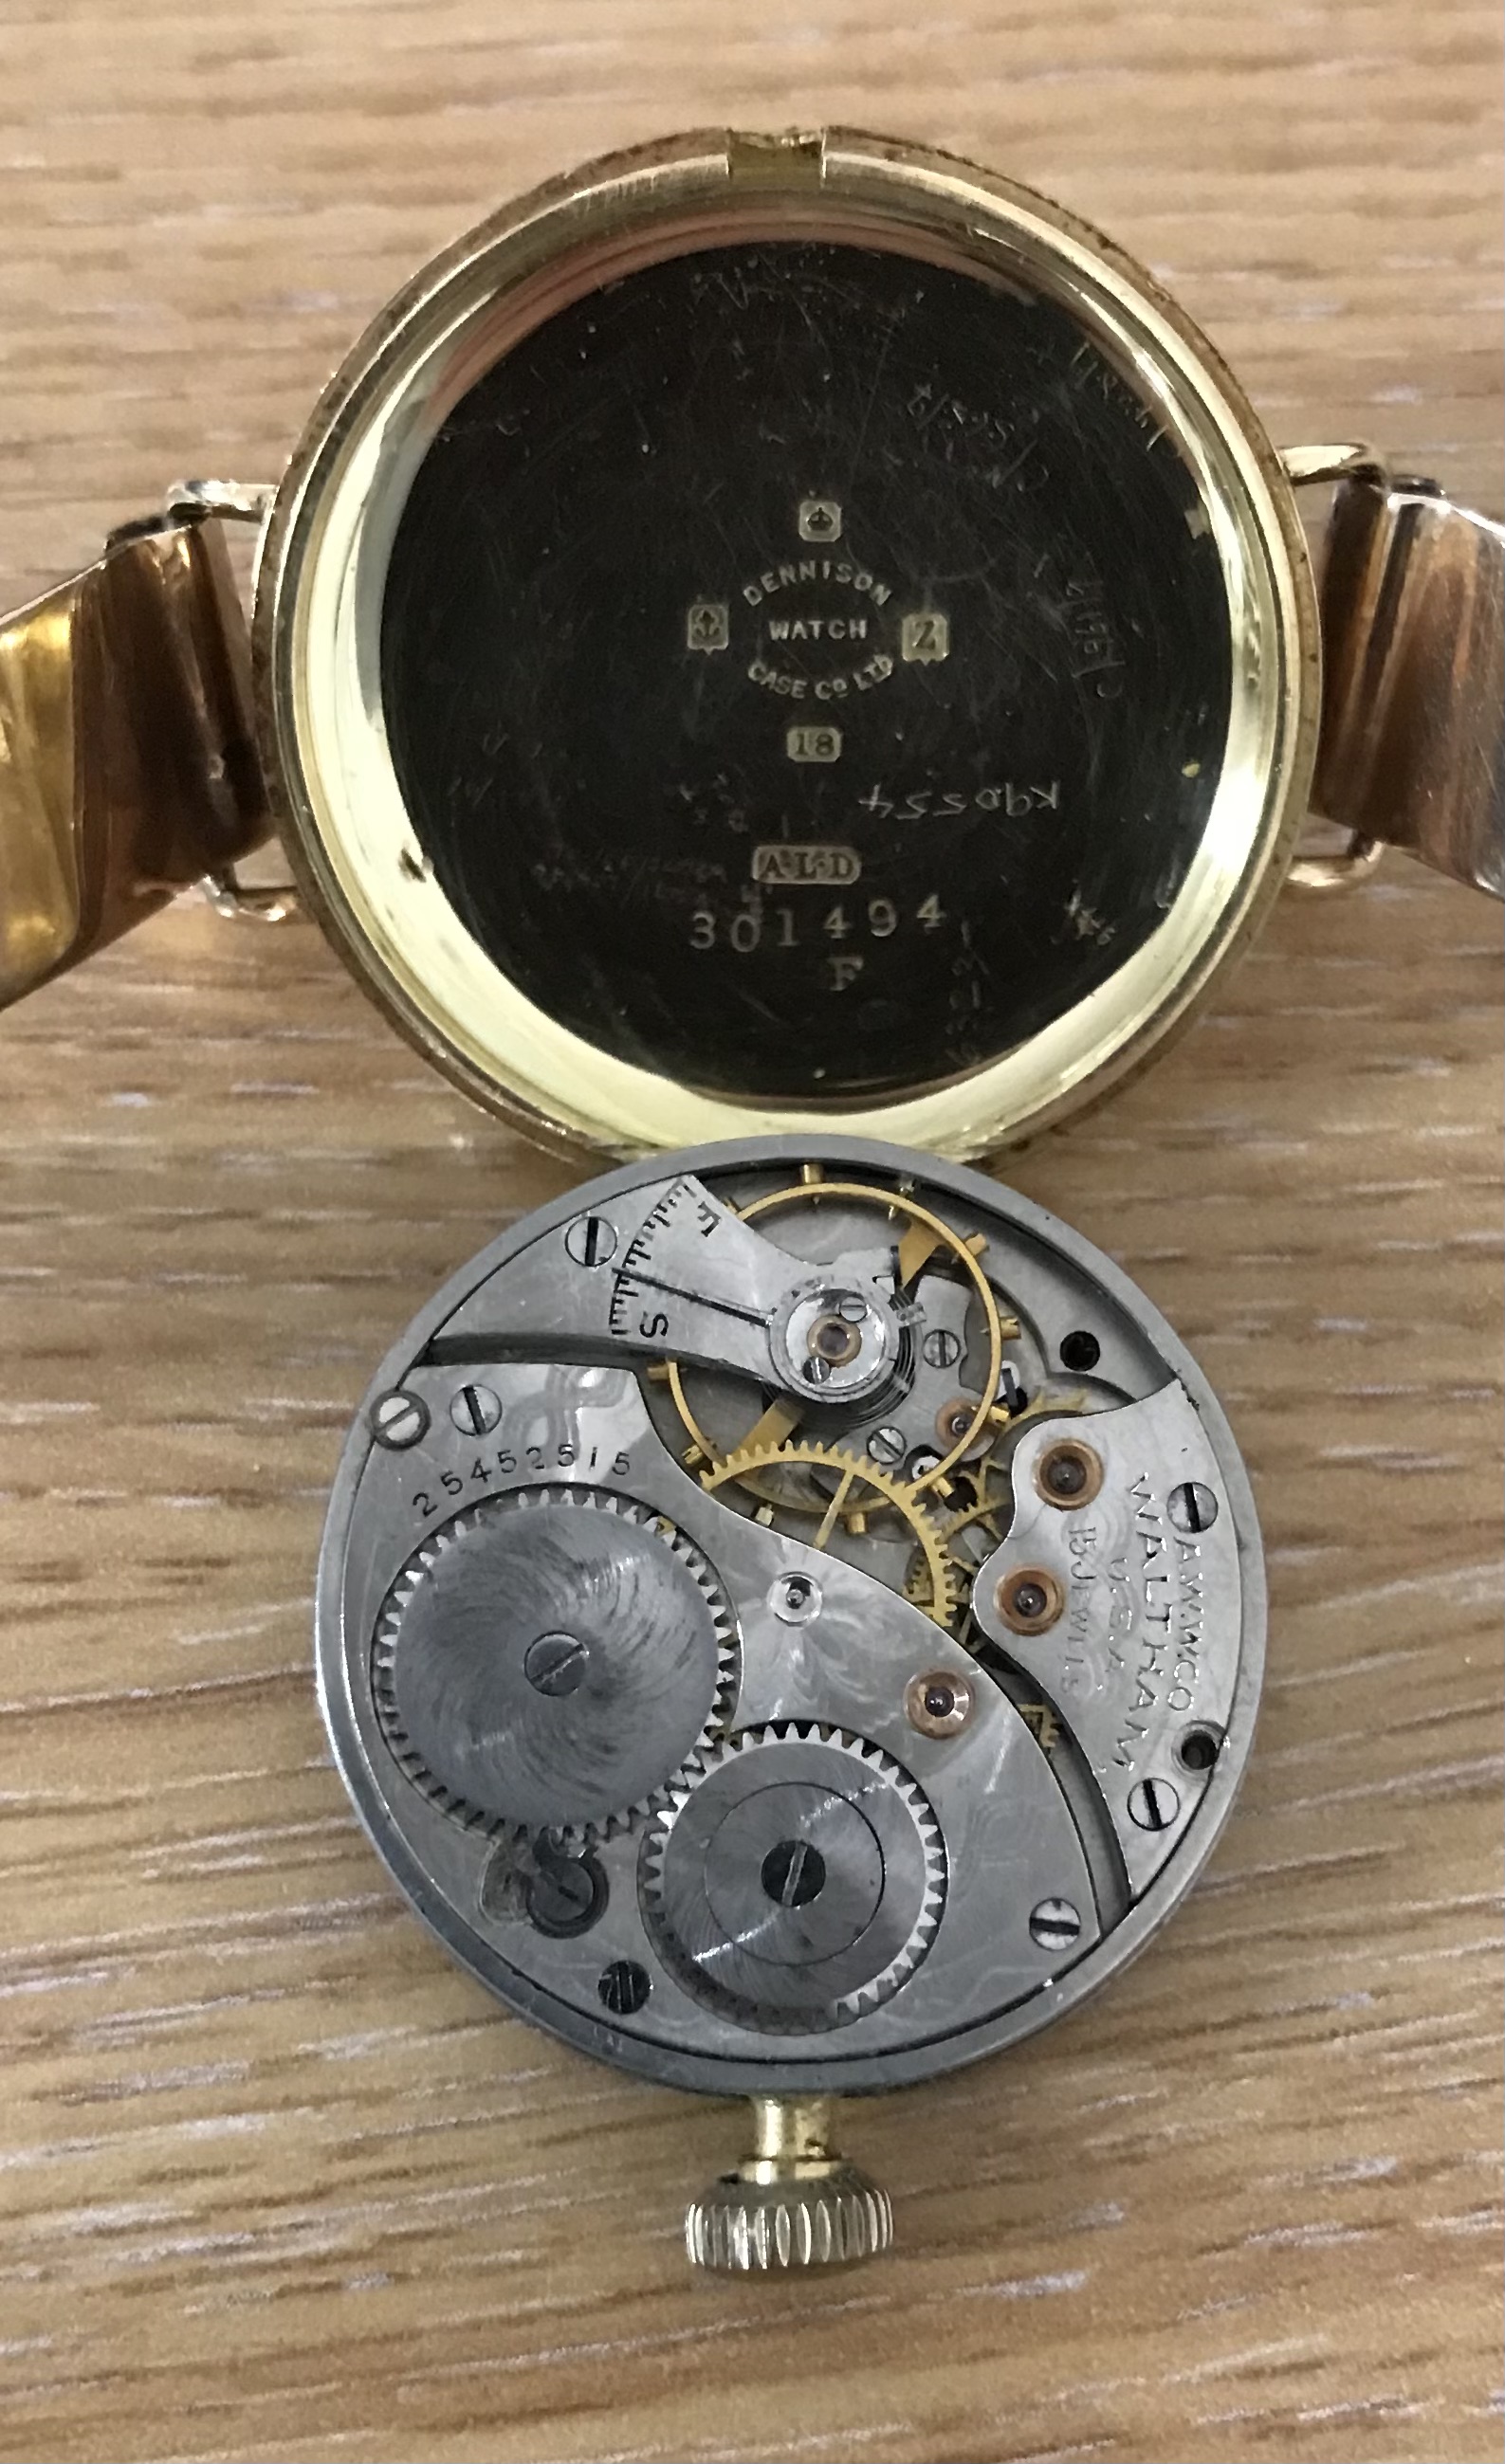 Waltham 18ct wire-lug wristwatch, case no. 301494, serial no. 25452515, circa 1926, signed dial with - Image 3 of 3